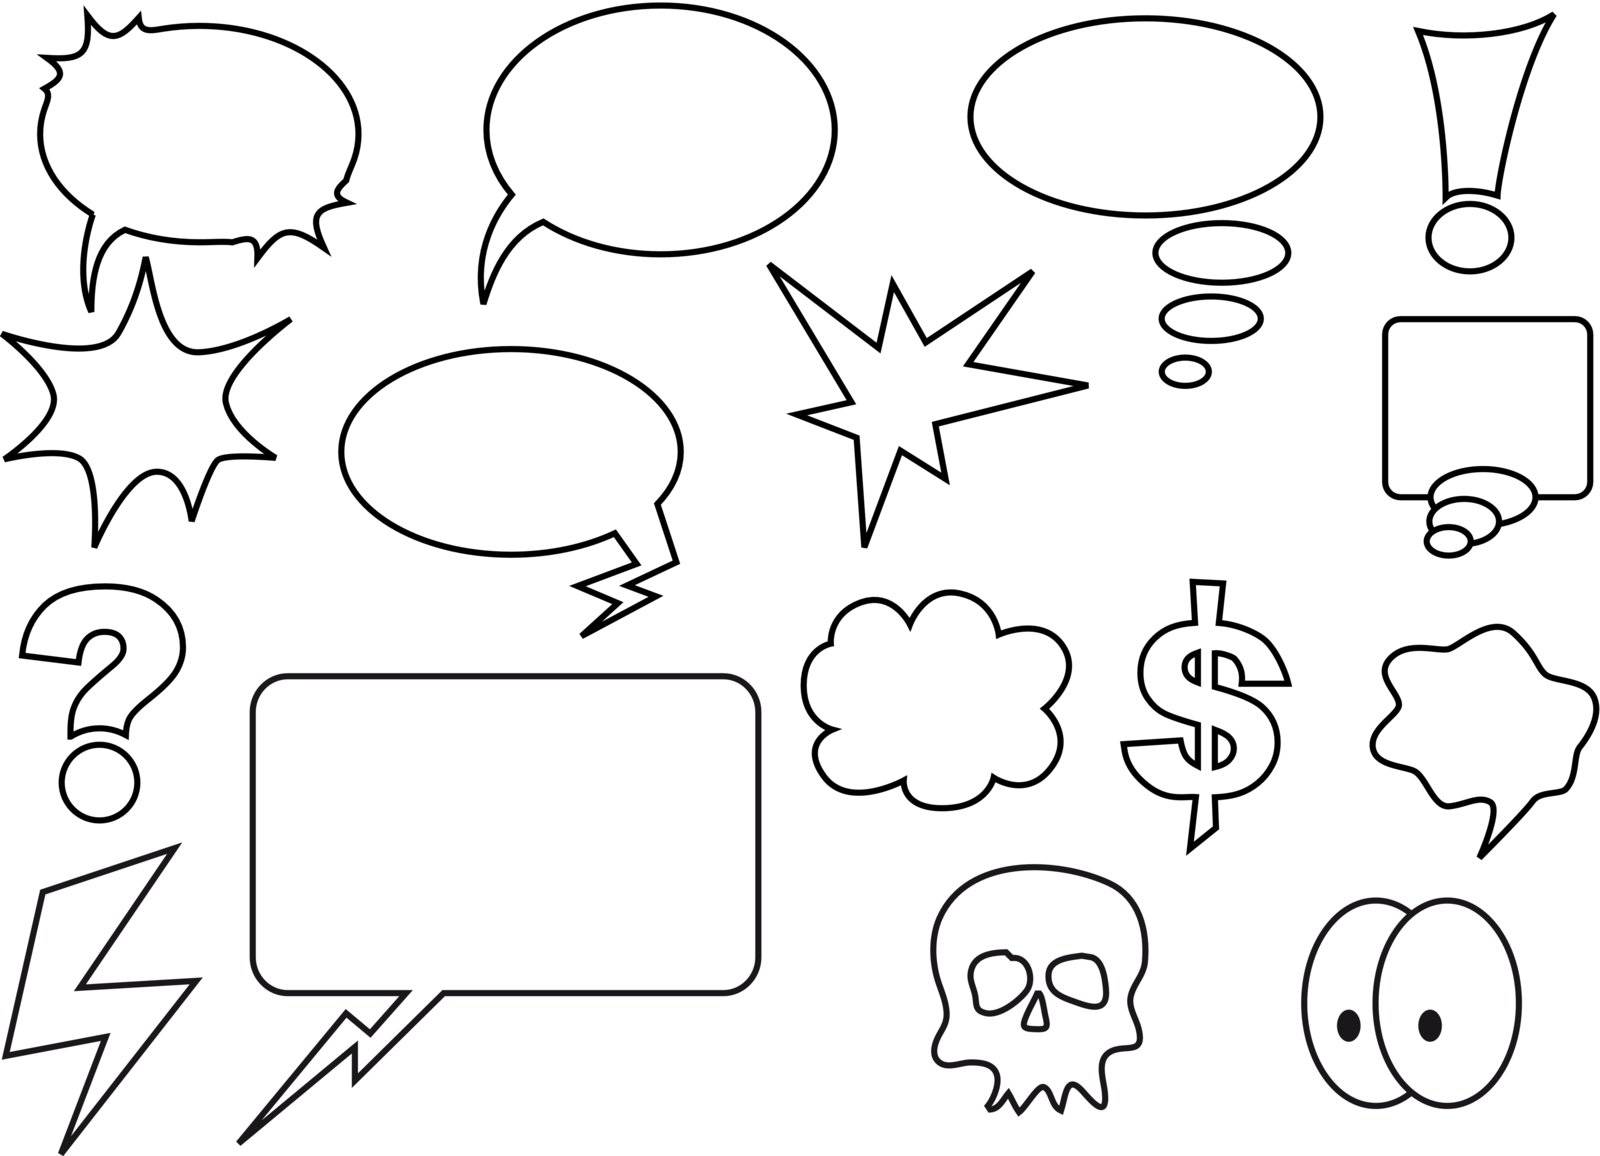 speech bubbles and some other comic elements